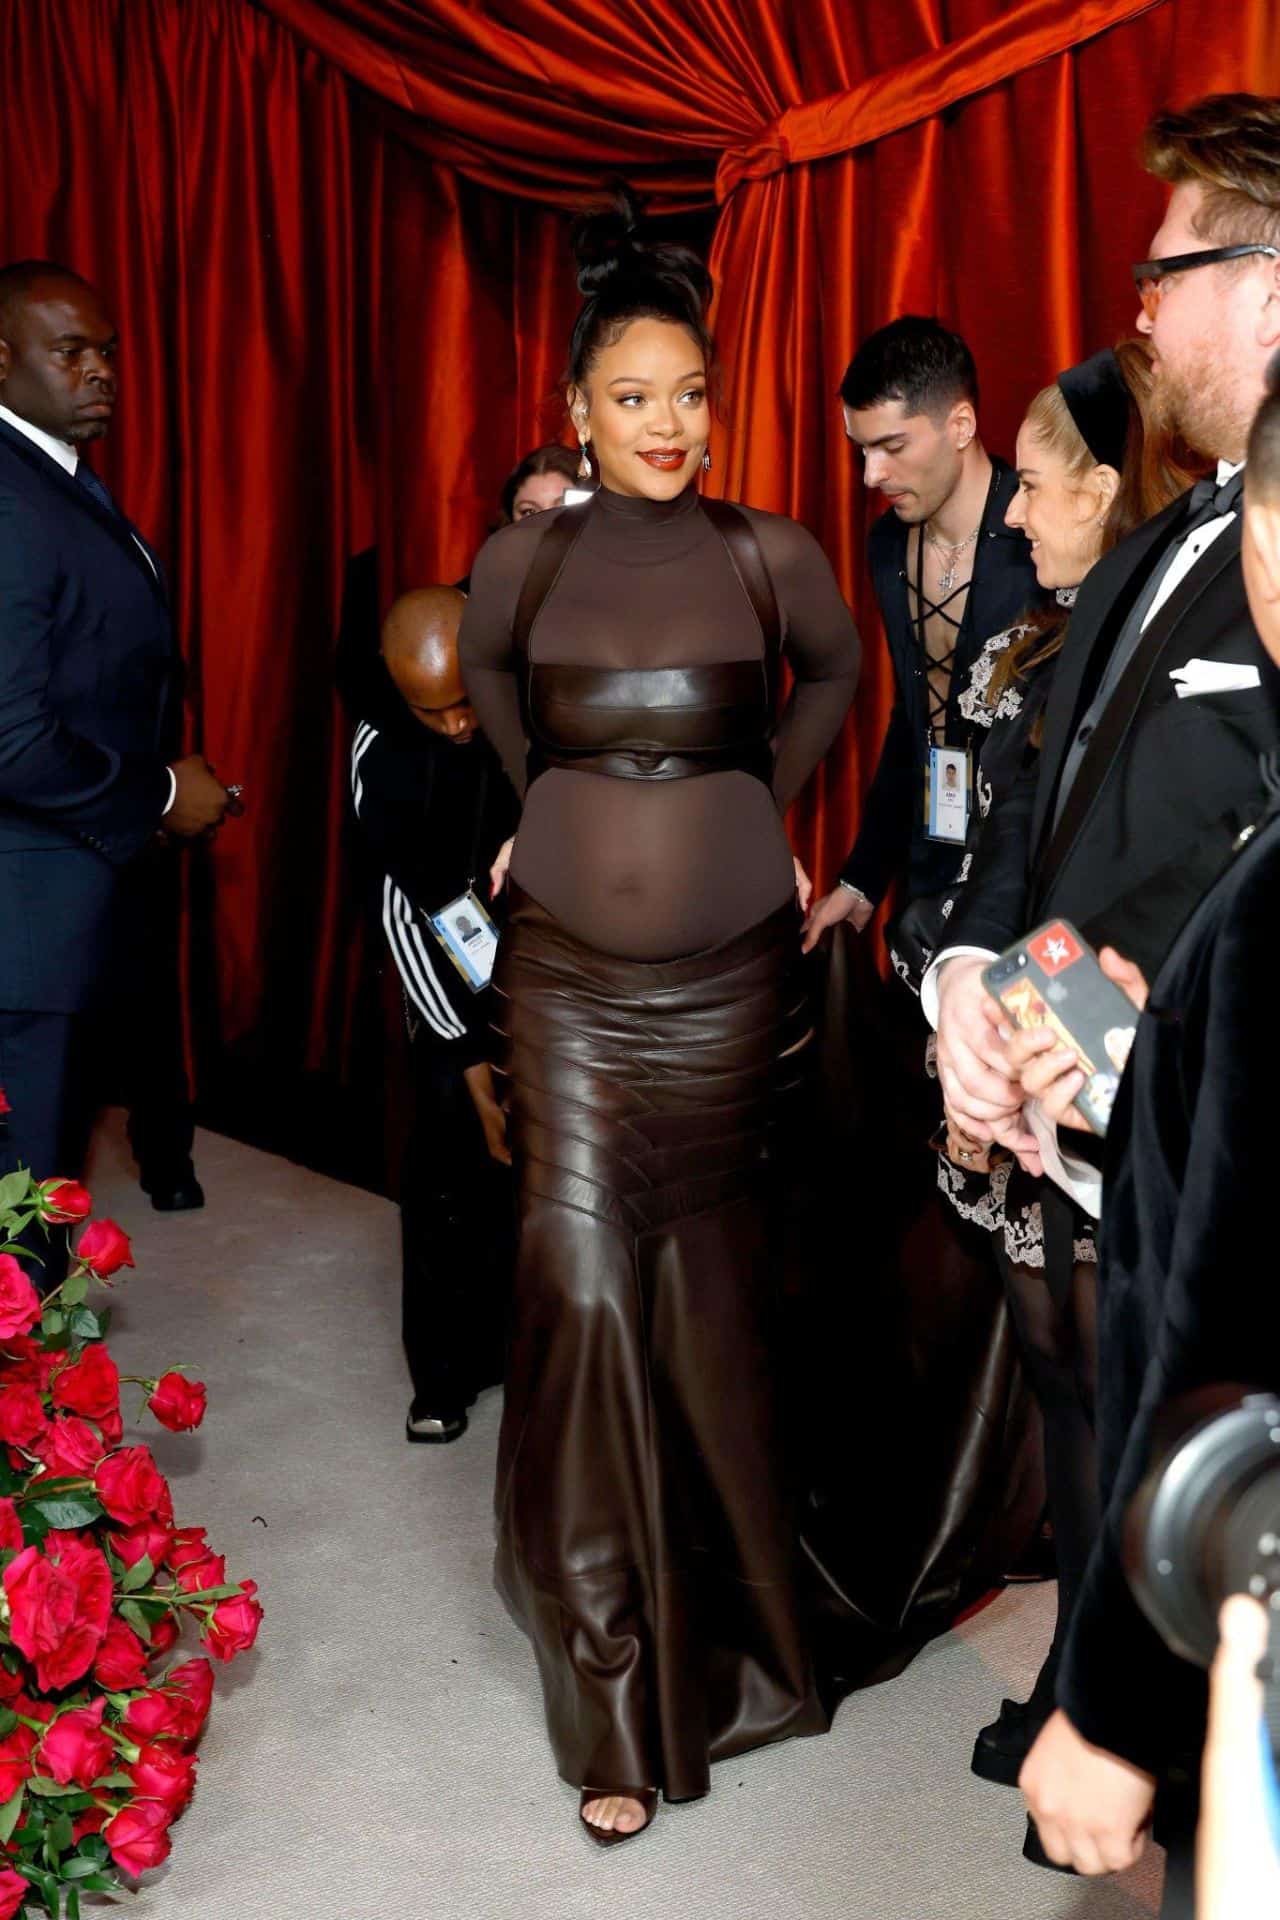 Rihanna Wows in a Leather Dress with Cutouts at the Oscars 2023